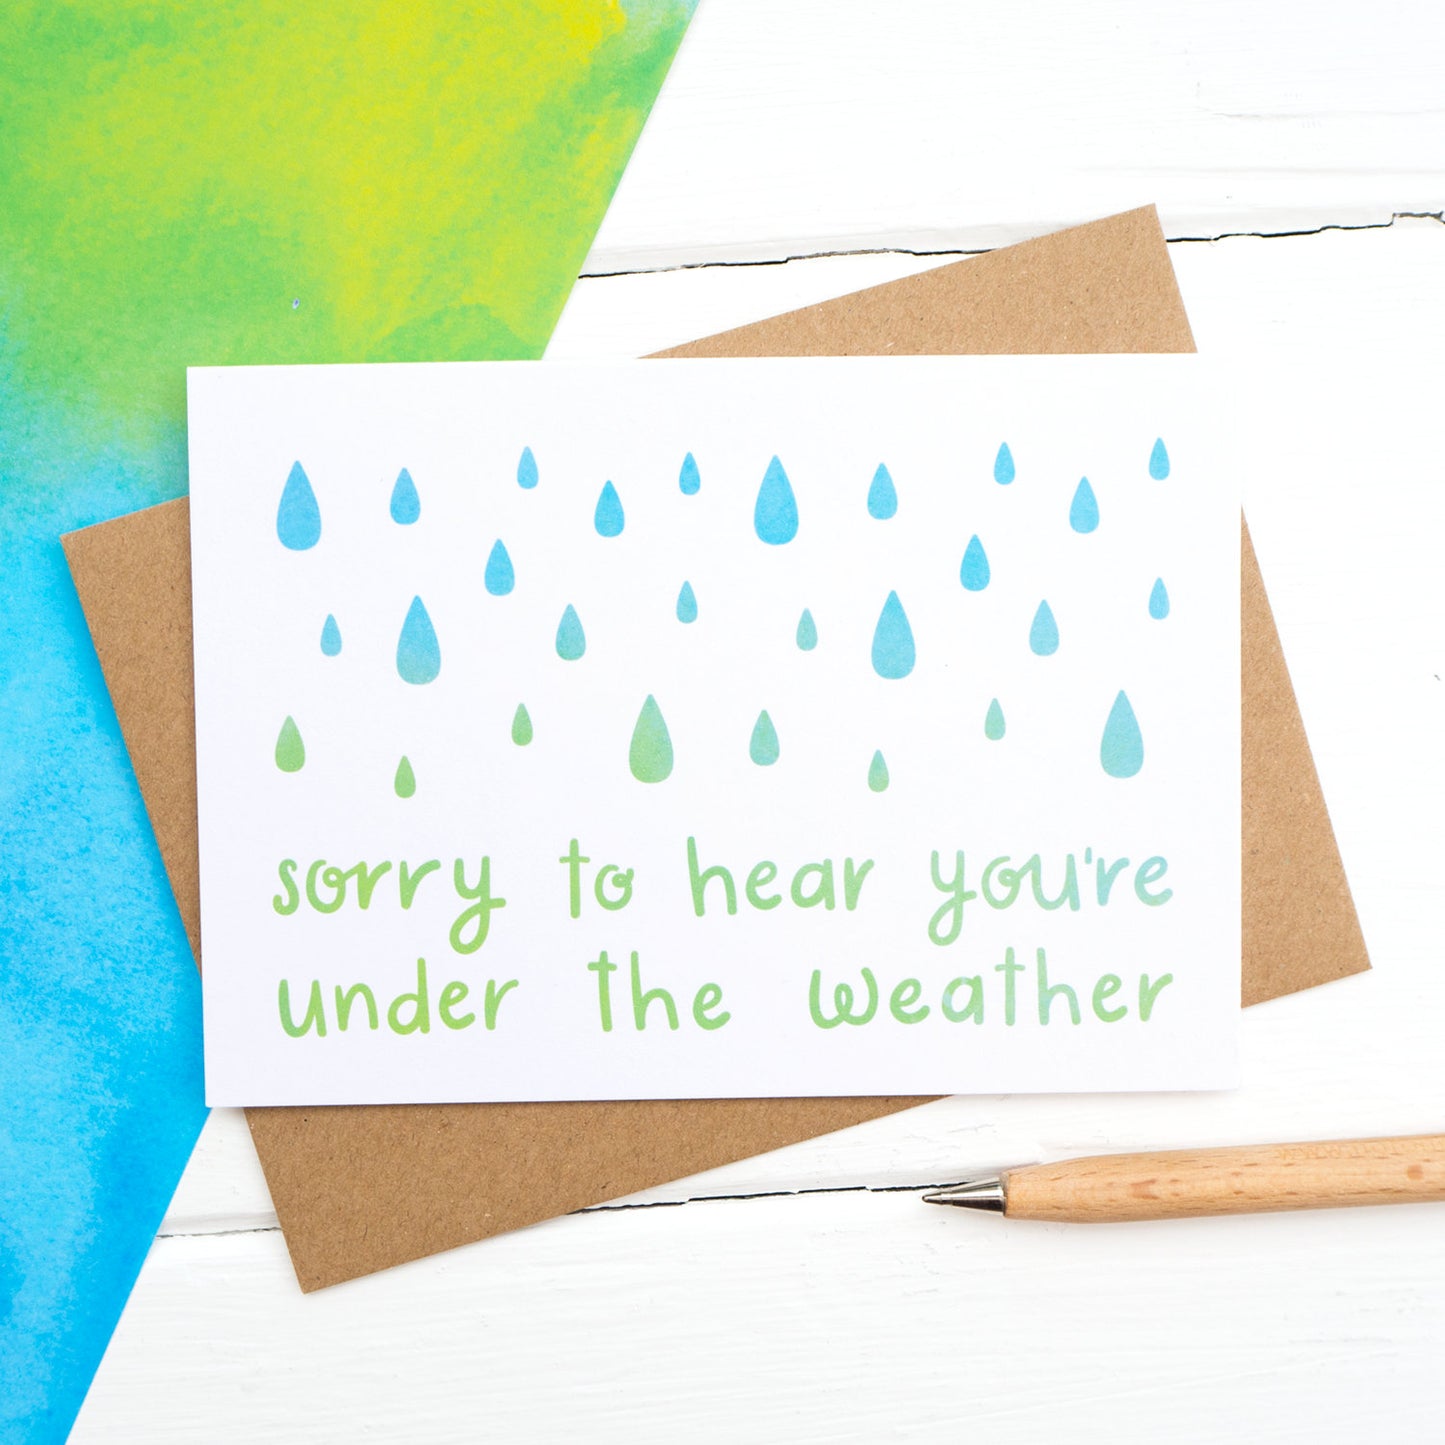 Sorry to hear you're under the weather, get well soon card.